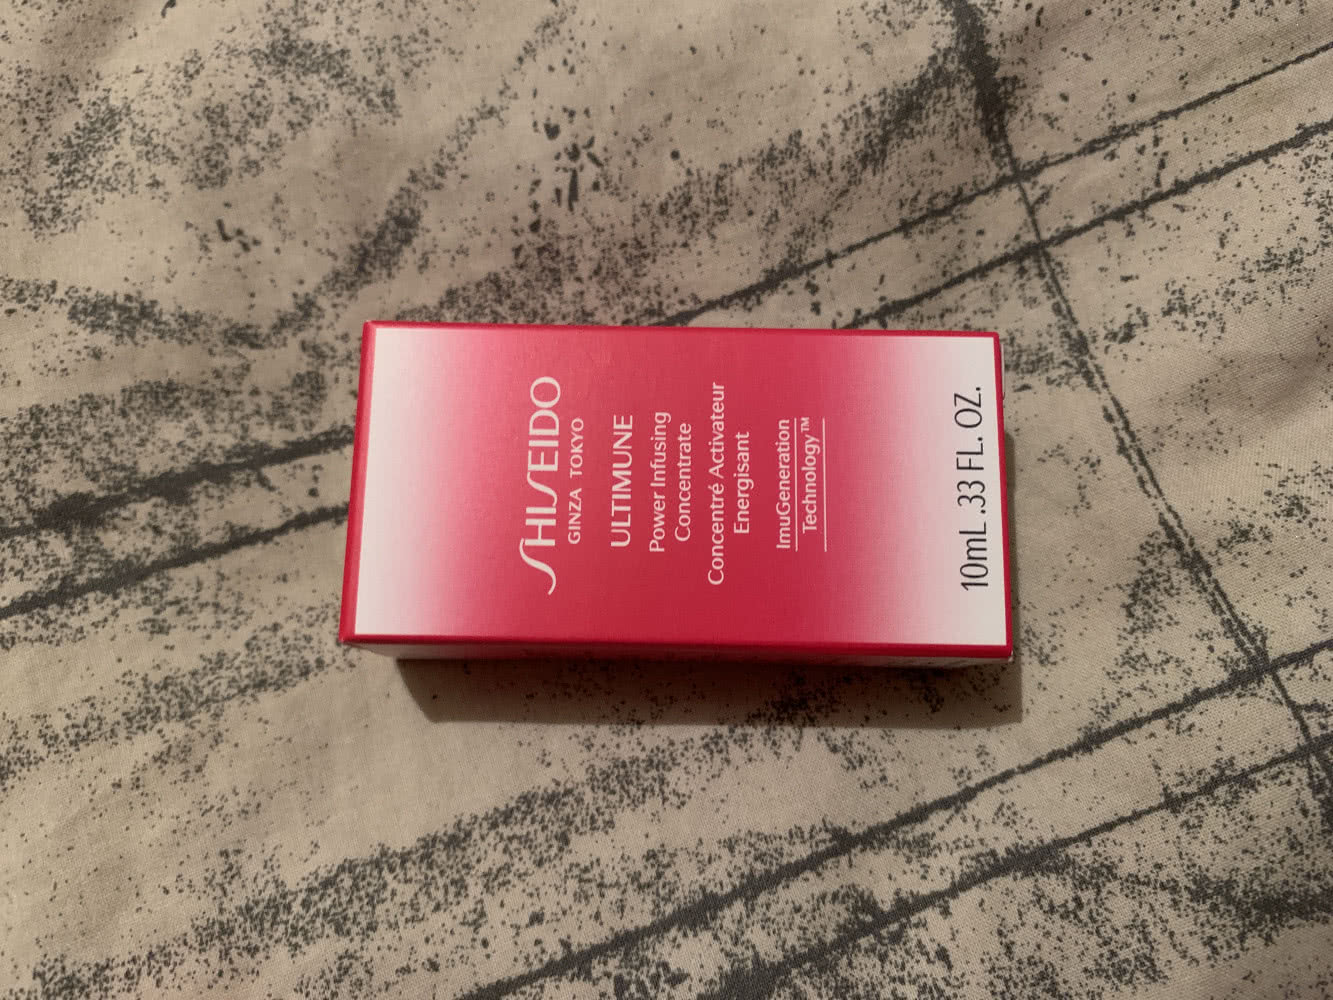 Shiseido, Power Infusing Concentrate (10 мл)